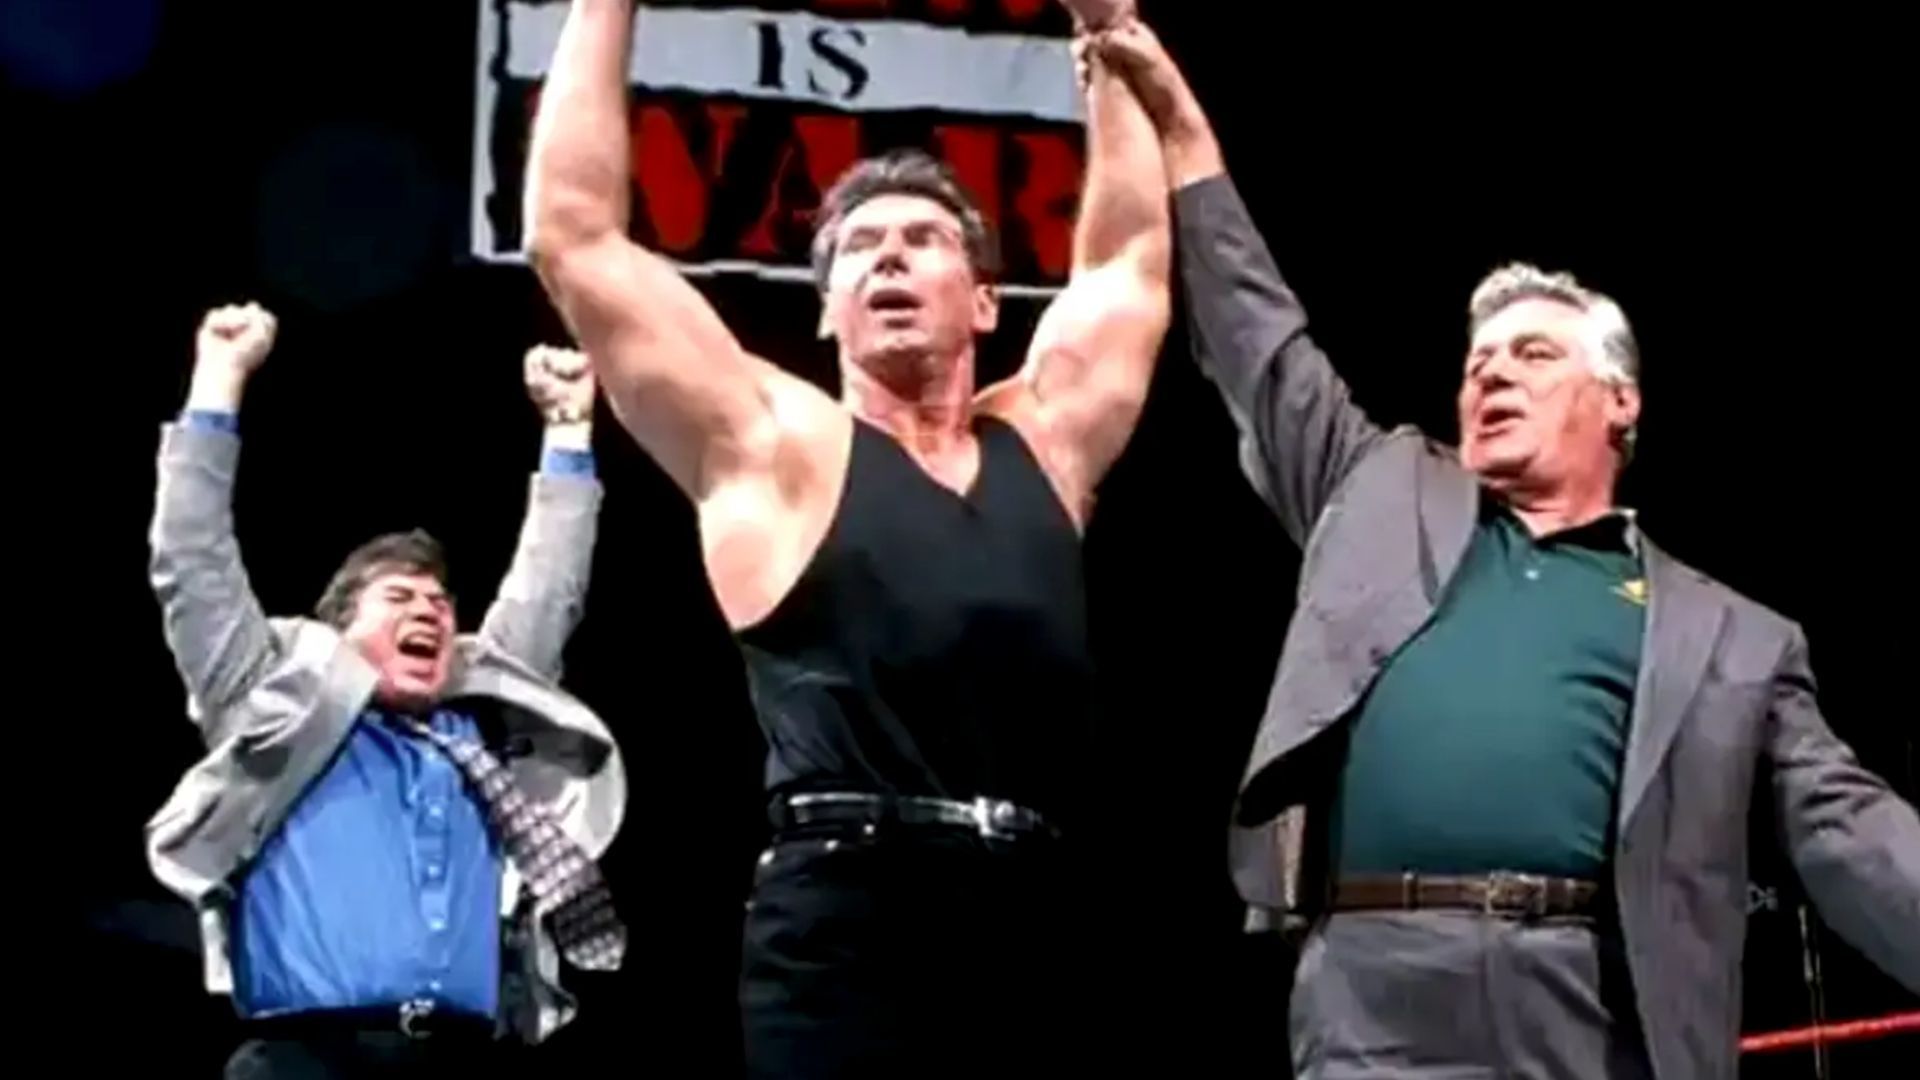 Vince McMahon, Gerald Brisco, and Pat Patterson on WWE RAW!